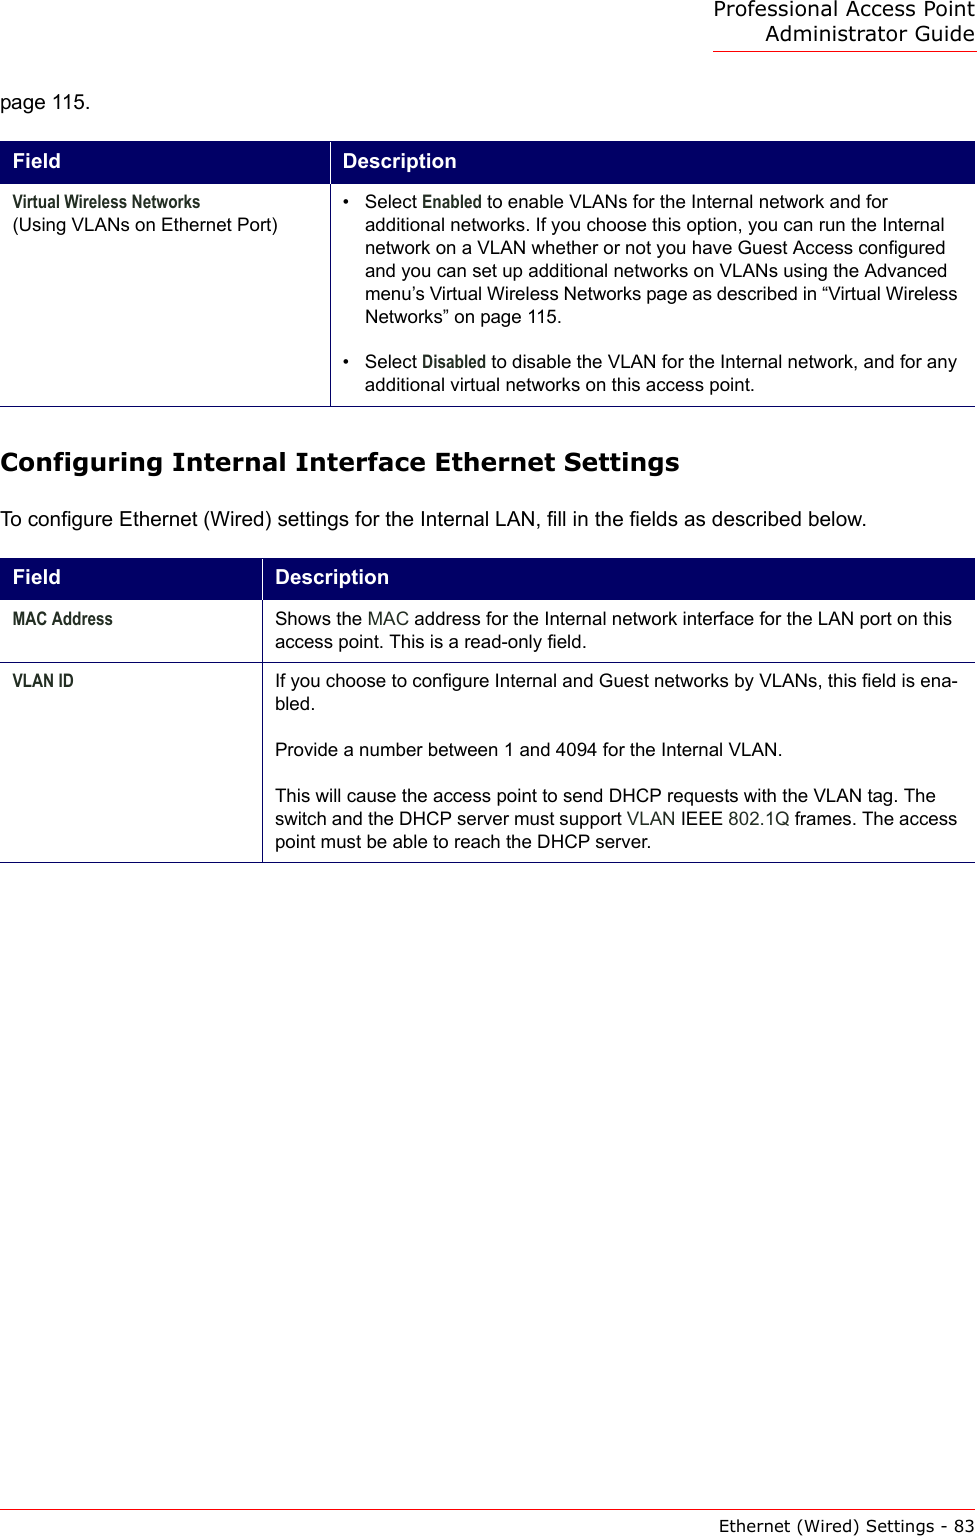 Professional Access Point Administrator GuideEthernet (Wired) Settings - 83page 115.Configuring Internal Interface Ethernet SettingsTo configure Ethernet (Wired) settings for the Internal LAN, fill in the fields as described below.Field DescriptionVirtual Wireless Networks (Using VLANs on Ethernet Port)•Select Enabled to enable VLANs for the Internal network and for additional networks. If you choose this option, you can run the Internal network on a VLAN whether or not you have Guest Access configured and you can set up additional networks on VLANs using the Advanced menu’s Virtual Wireless Networks page as described in “Virtual Wireless Networks” on page 115.•Select Disabled to disable the VLAN for the Internal network, and for any additional virtual networks on this access point.Field DescriptionMAC Address Shows the MAC address for the Internal network interface for the LAN port on this access point. This is a read-only field.VLAN ID If you choose to configure Internal and Guest networks by VLANs, this field is ena-bled.Provide a number between 1 and 4094 for the Internal VLAN.This will cause the access point to send DHCP requests with the VLAN tag. The switch and the DHCP server must support VLAN IEEE 802.1Q frames. The access point must be able to reach the DHCP server.